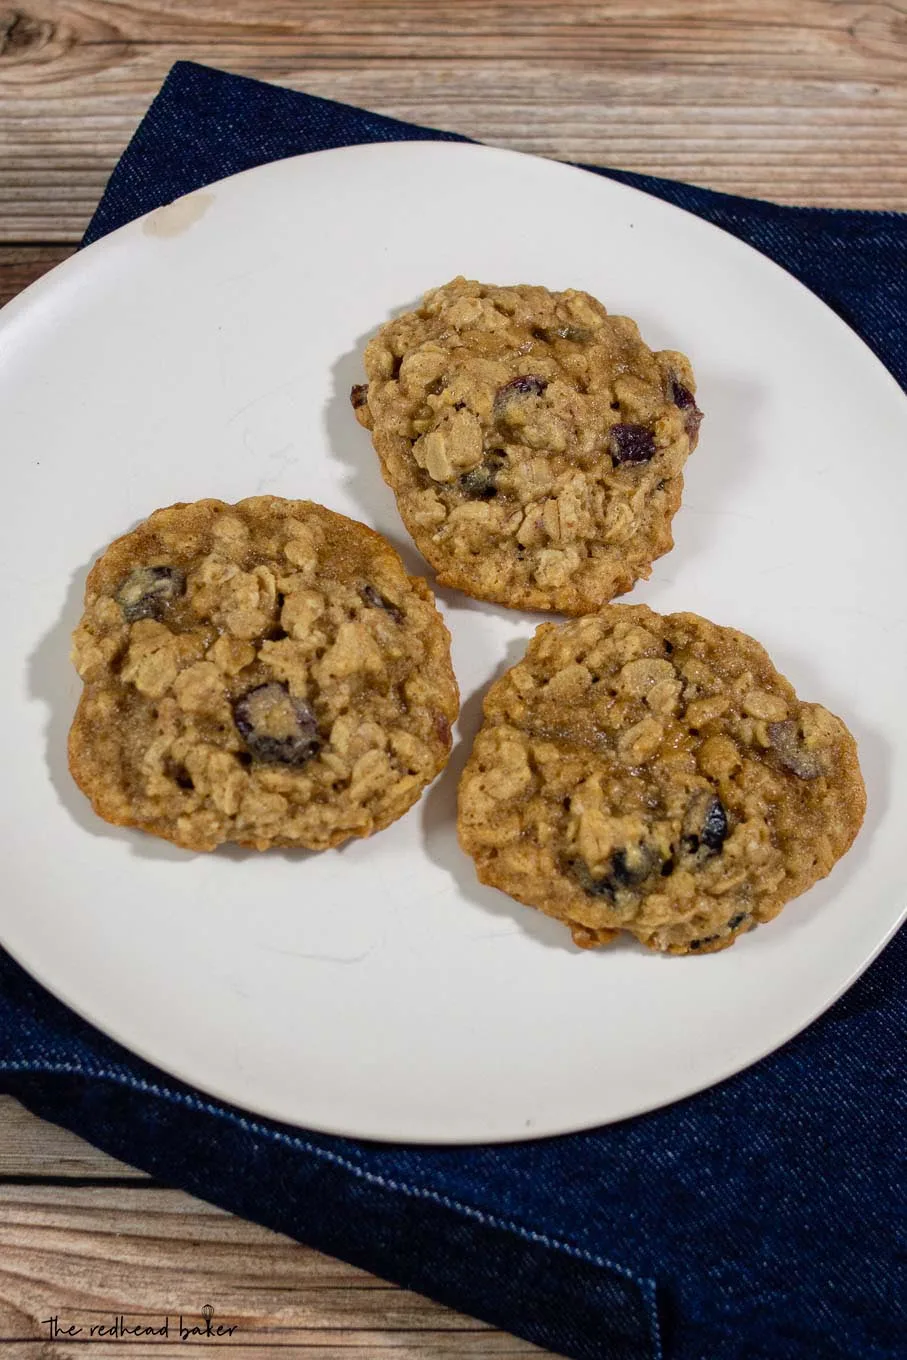 Three cranberry-orange oatmeal cookies on a plate